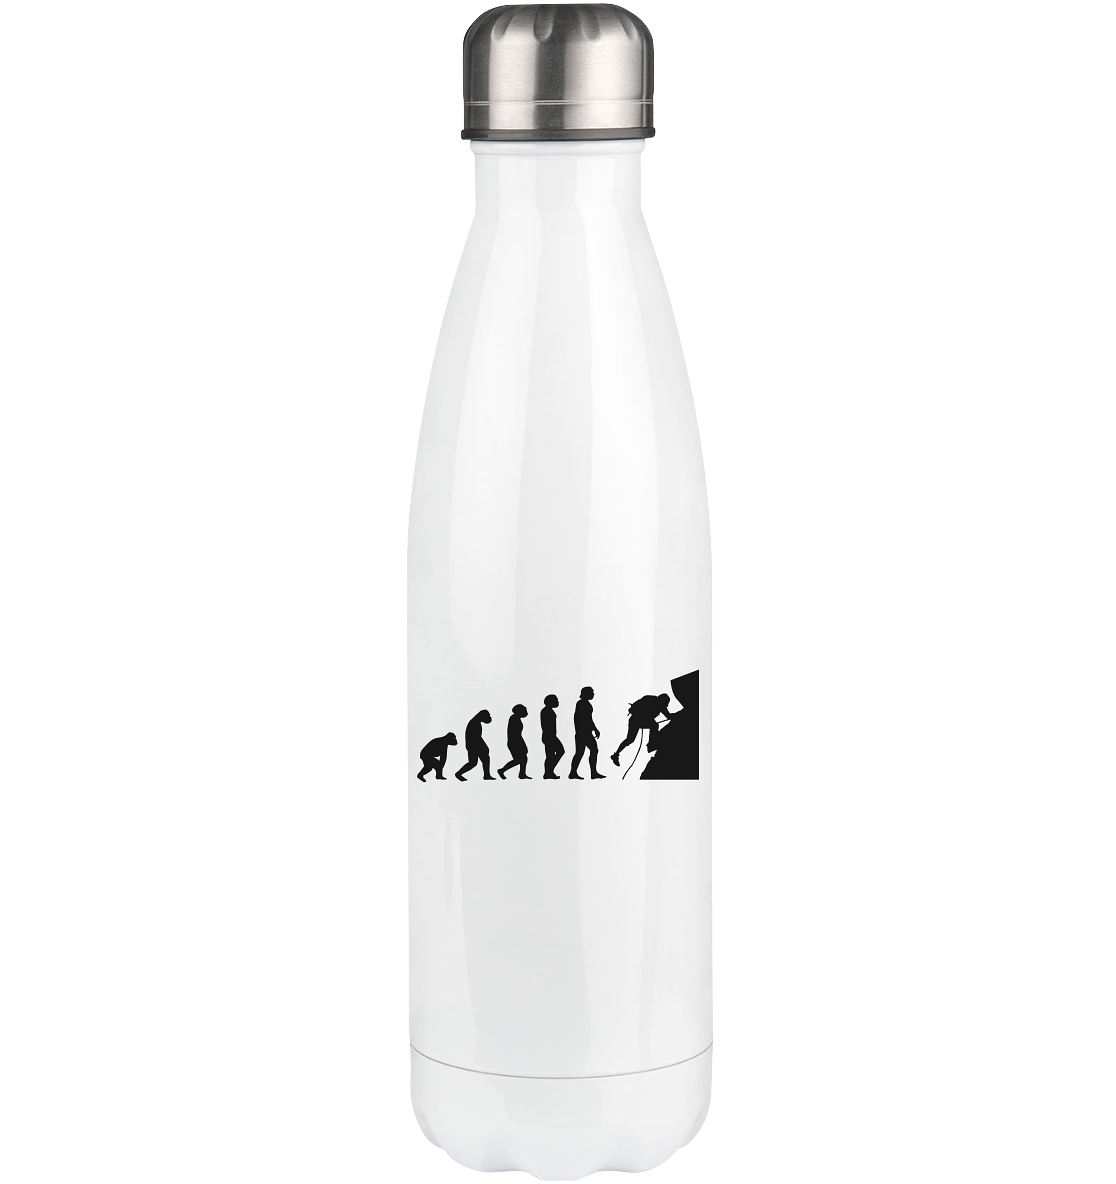 Evolution and Climbing - Edelstahl Thermosflasche klettern 500ml